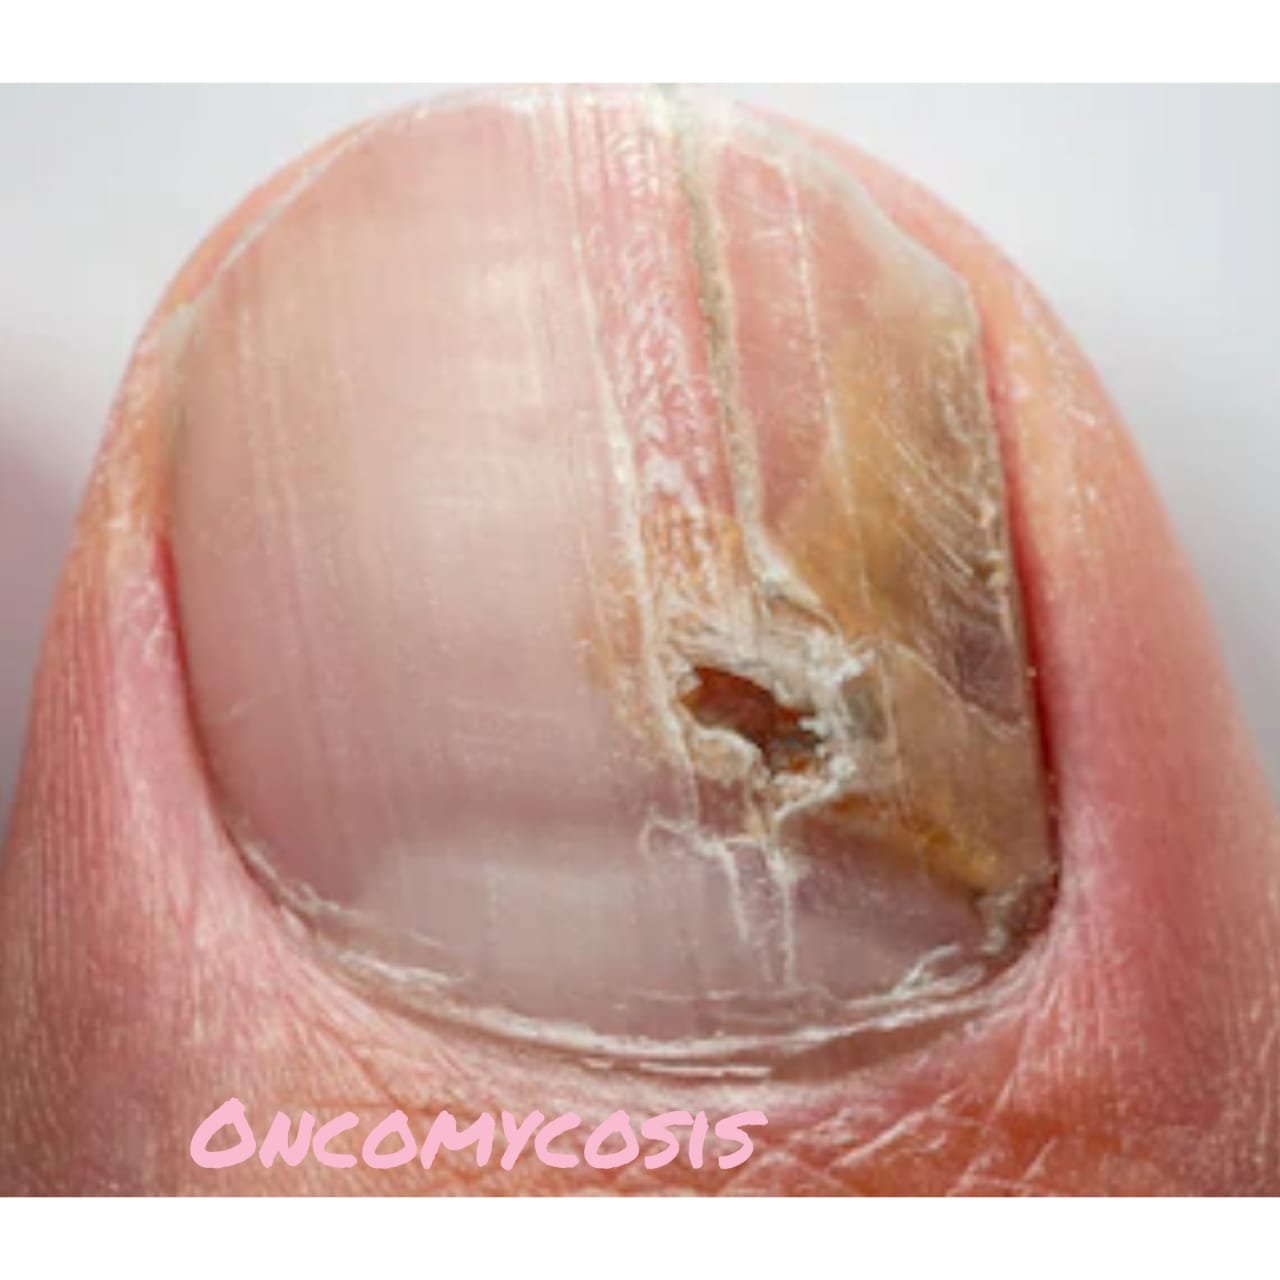 Nail Psoriasis: What It Is, Causes, Nail Pitting, Treatment